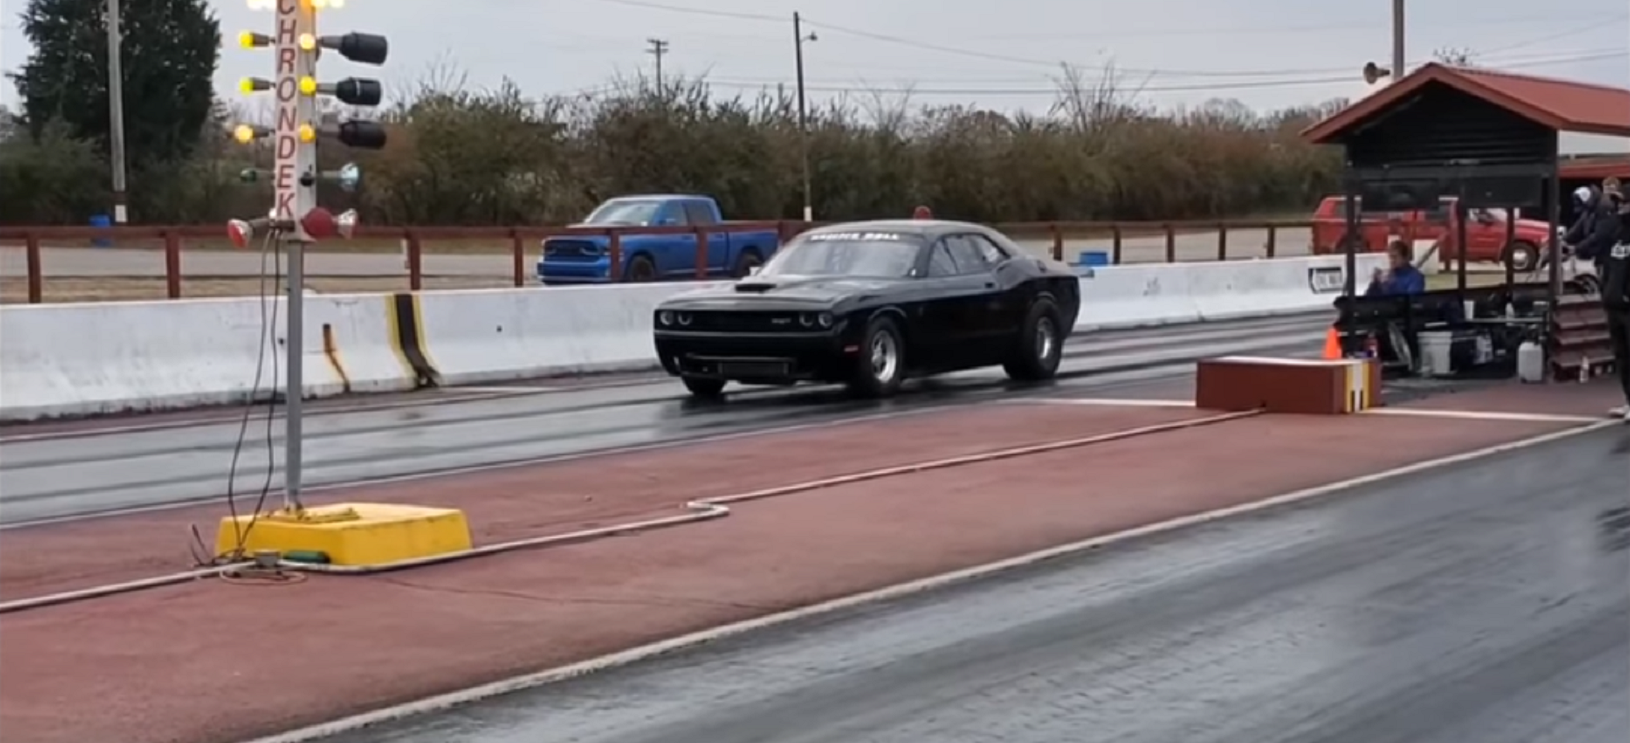 Challenger racing down the race track